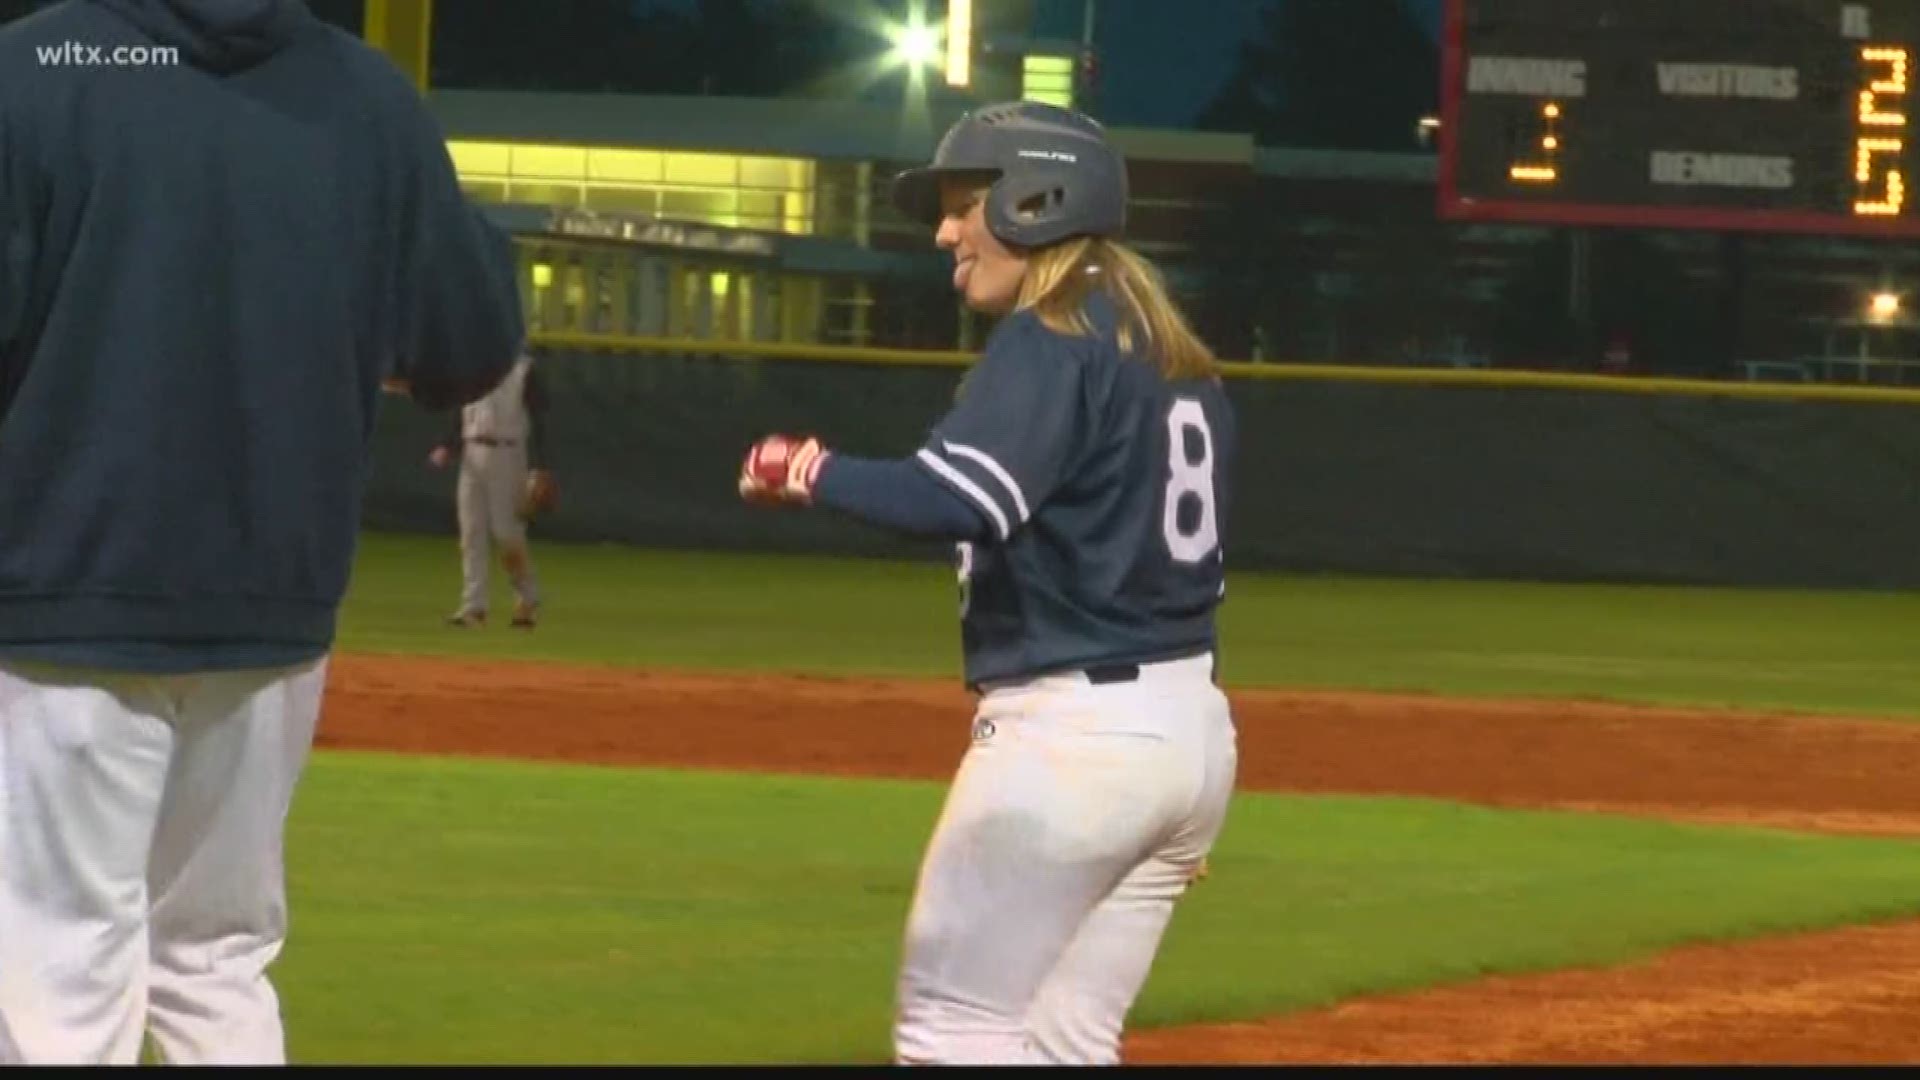 Lexi Pittelkau became the first girl to start at pitcher and play for a boys high school baseball program in the Midlands. The freshman pitcher and infielder for the Lugoff-Elgin becomes the second girl in state history to play for a high school program.